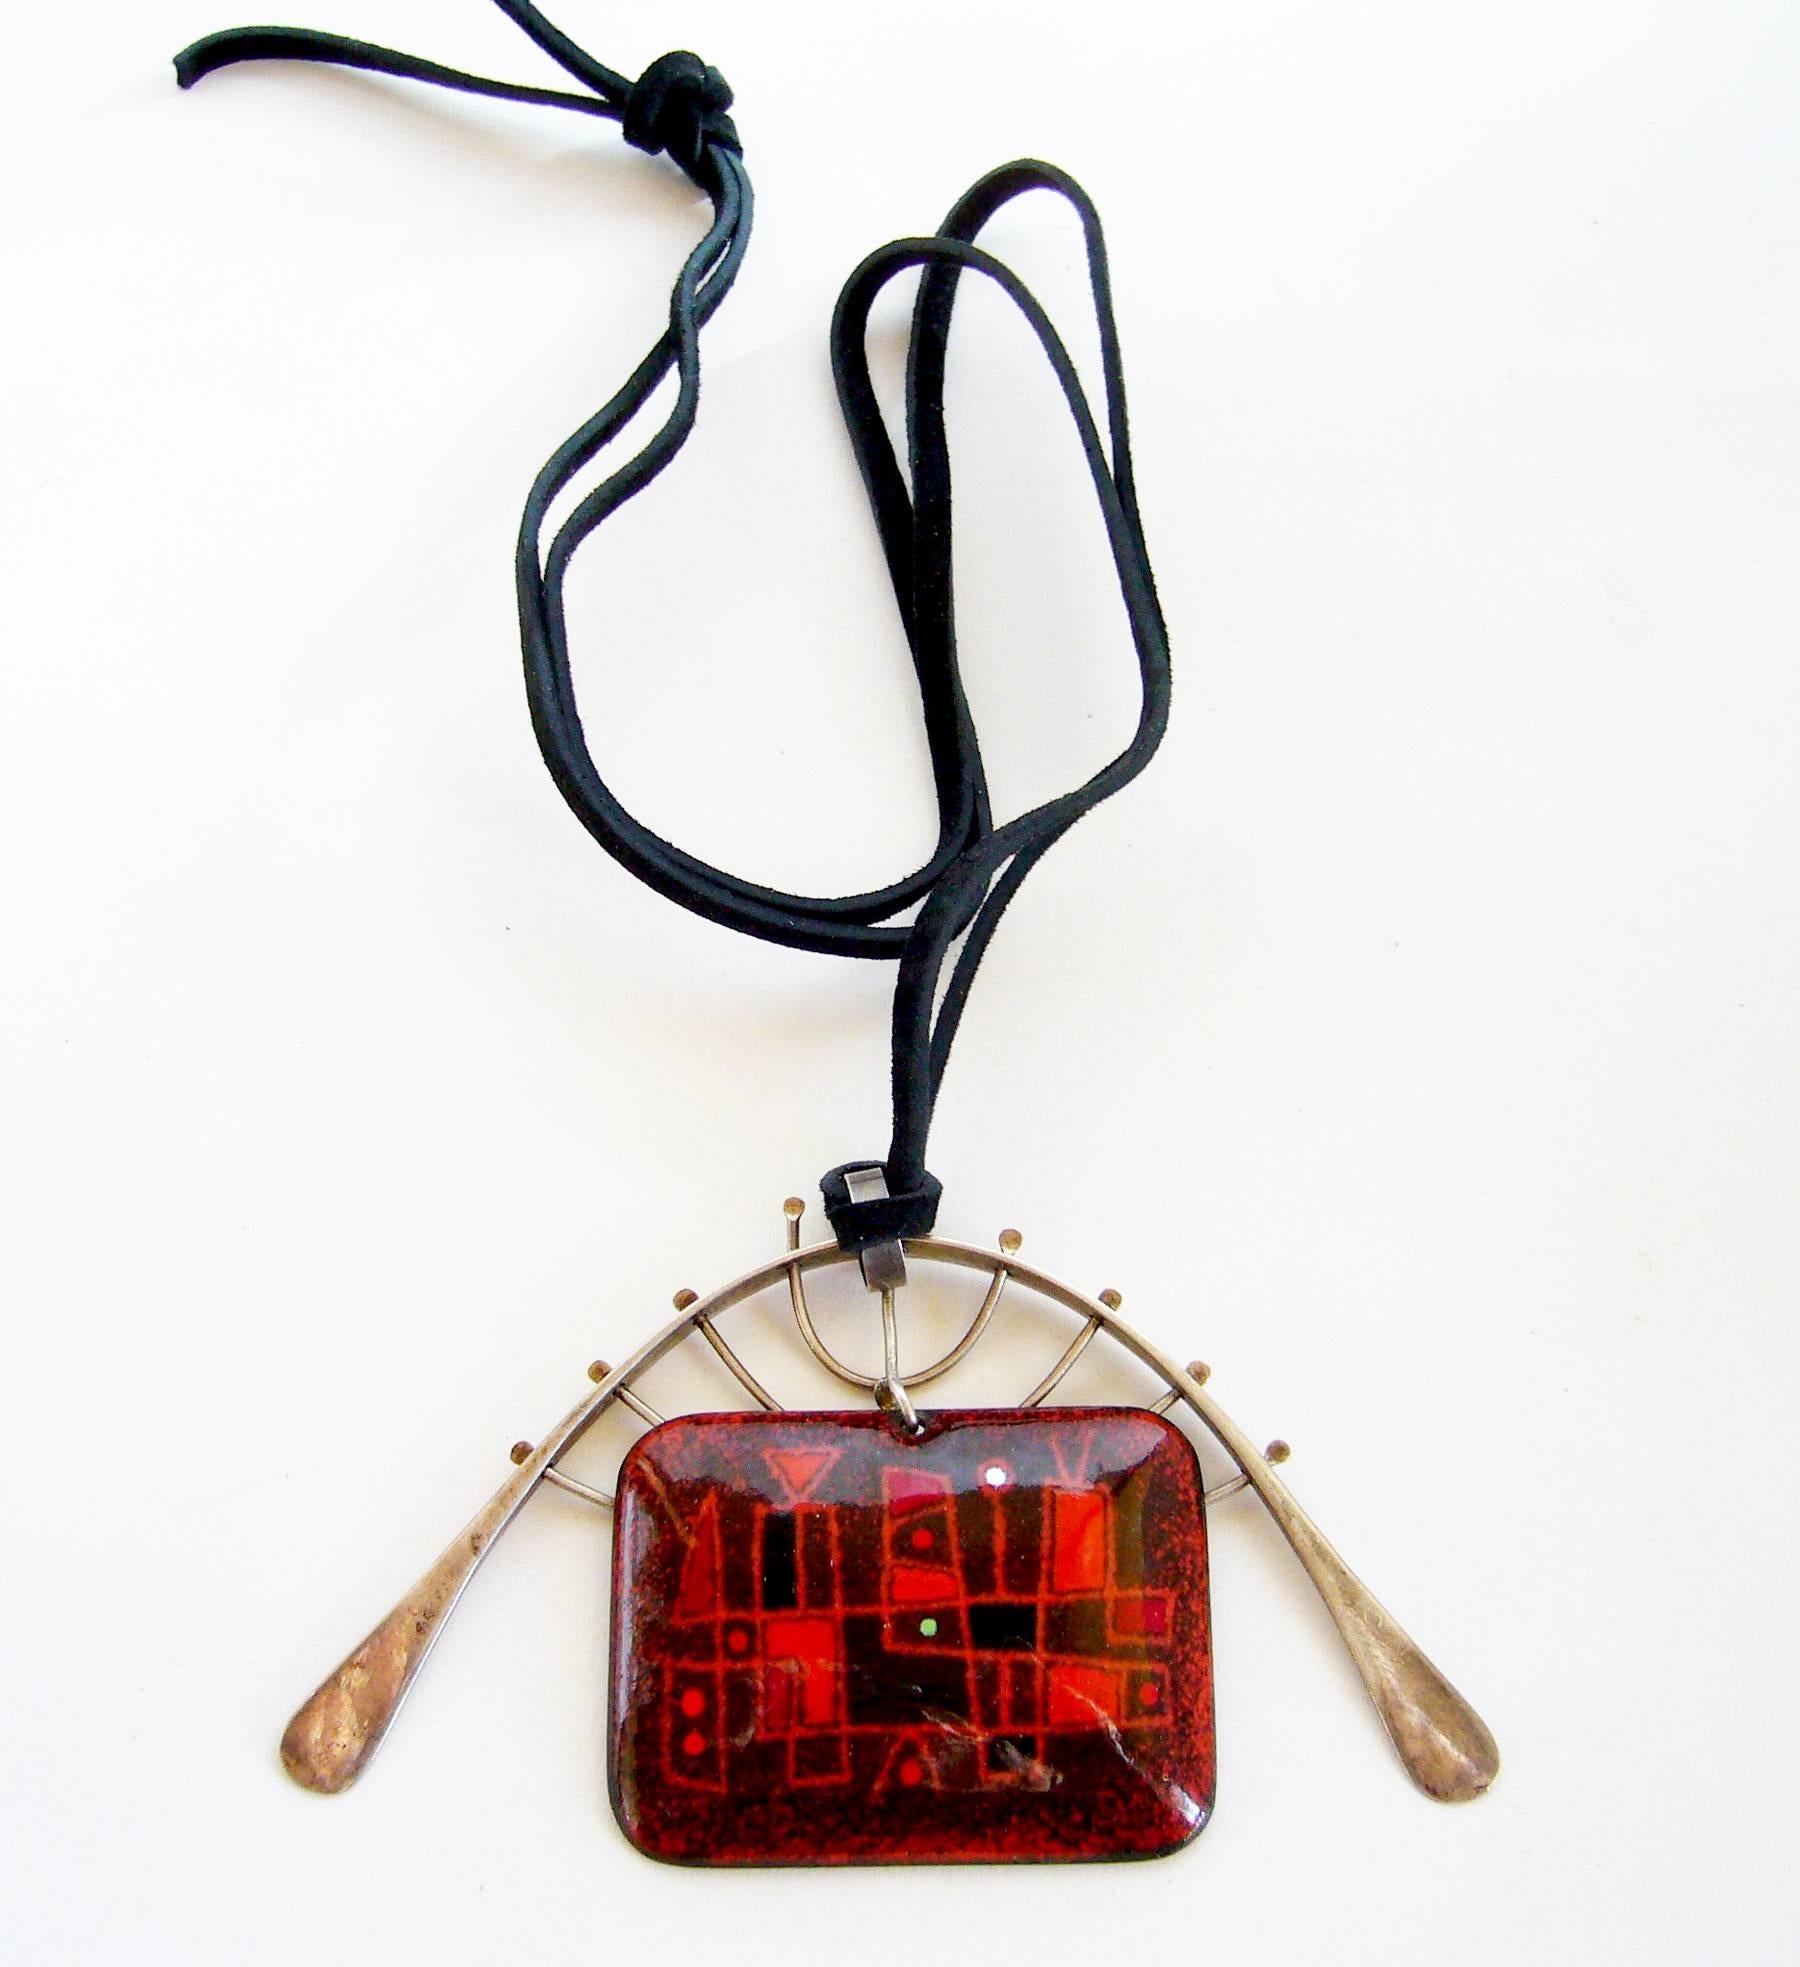 Enamel with abstract design surrounded by a sterling silver cage pendant by Barney Reid of San Diego, California.  Reid was a founding member of the Allied Craftsmen and member of the San Diego Art Guild.

Pendant measures 2.25